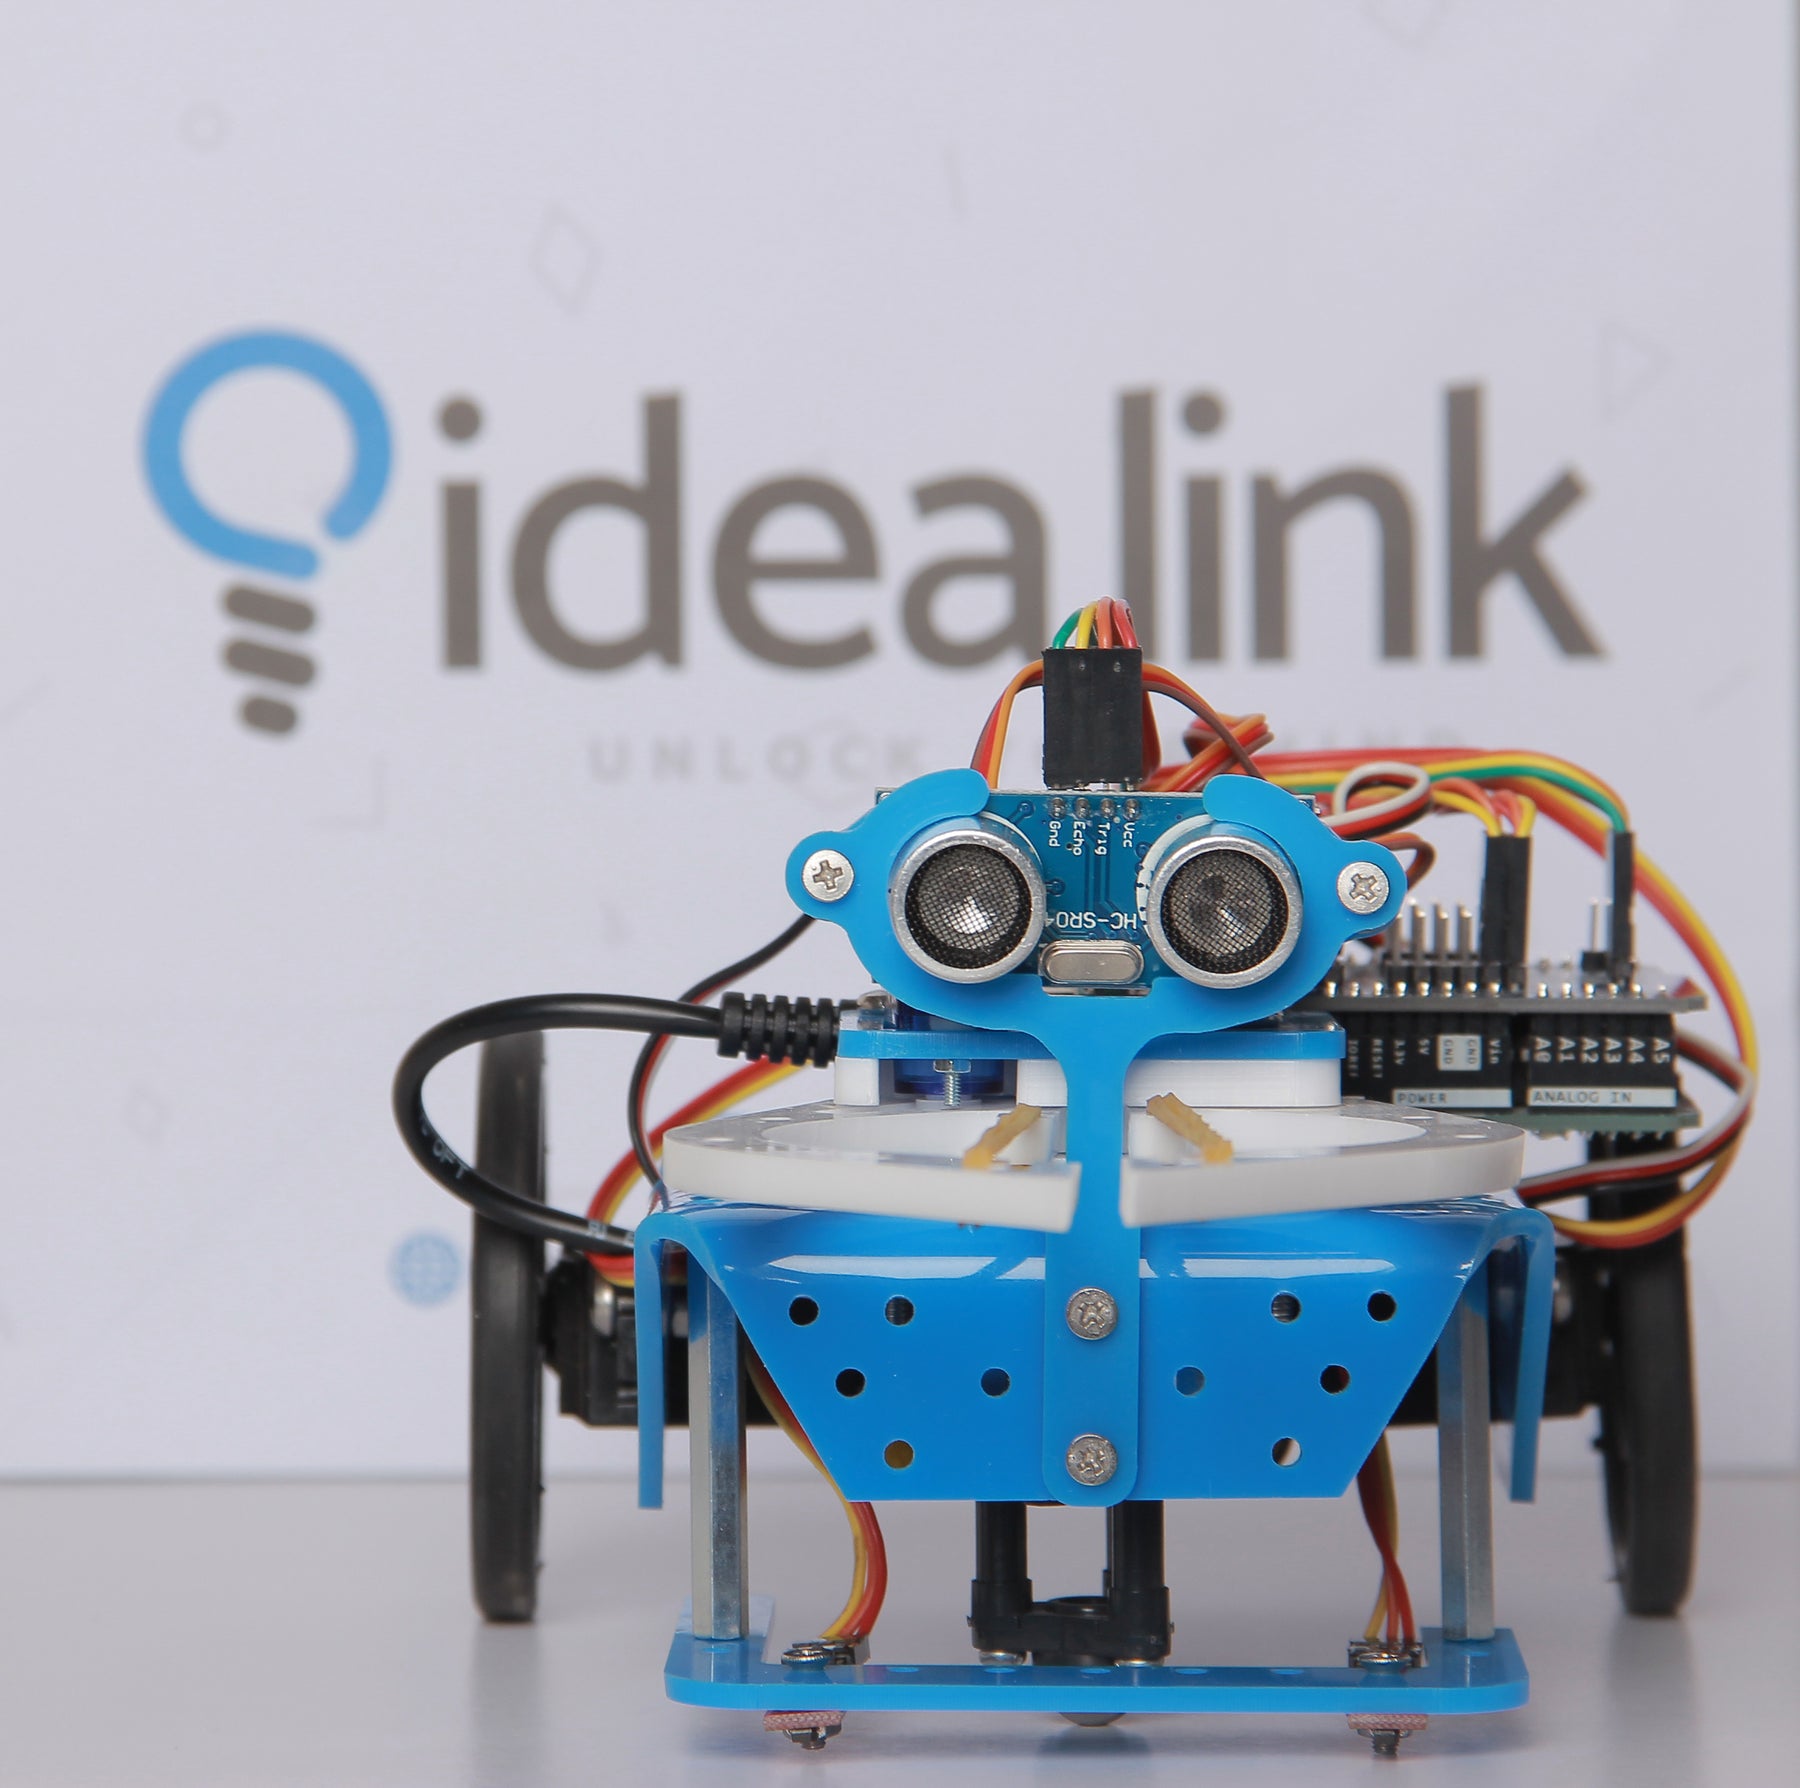 Getting Started with IdeaBot